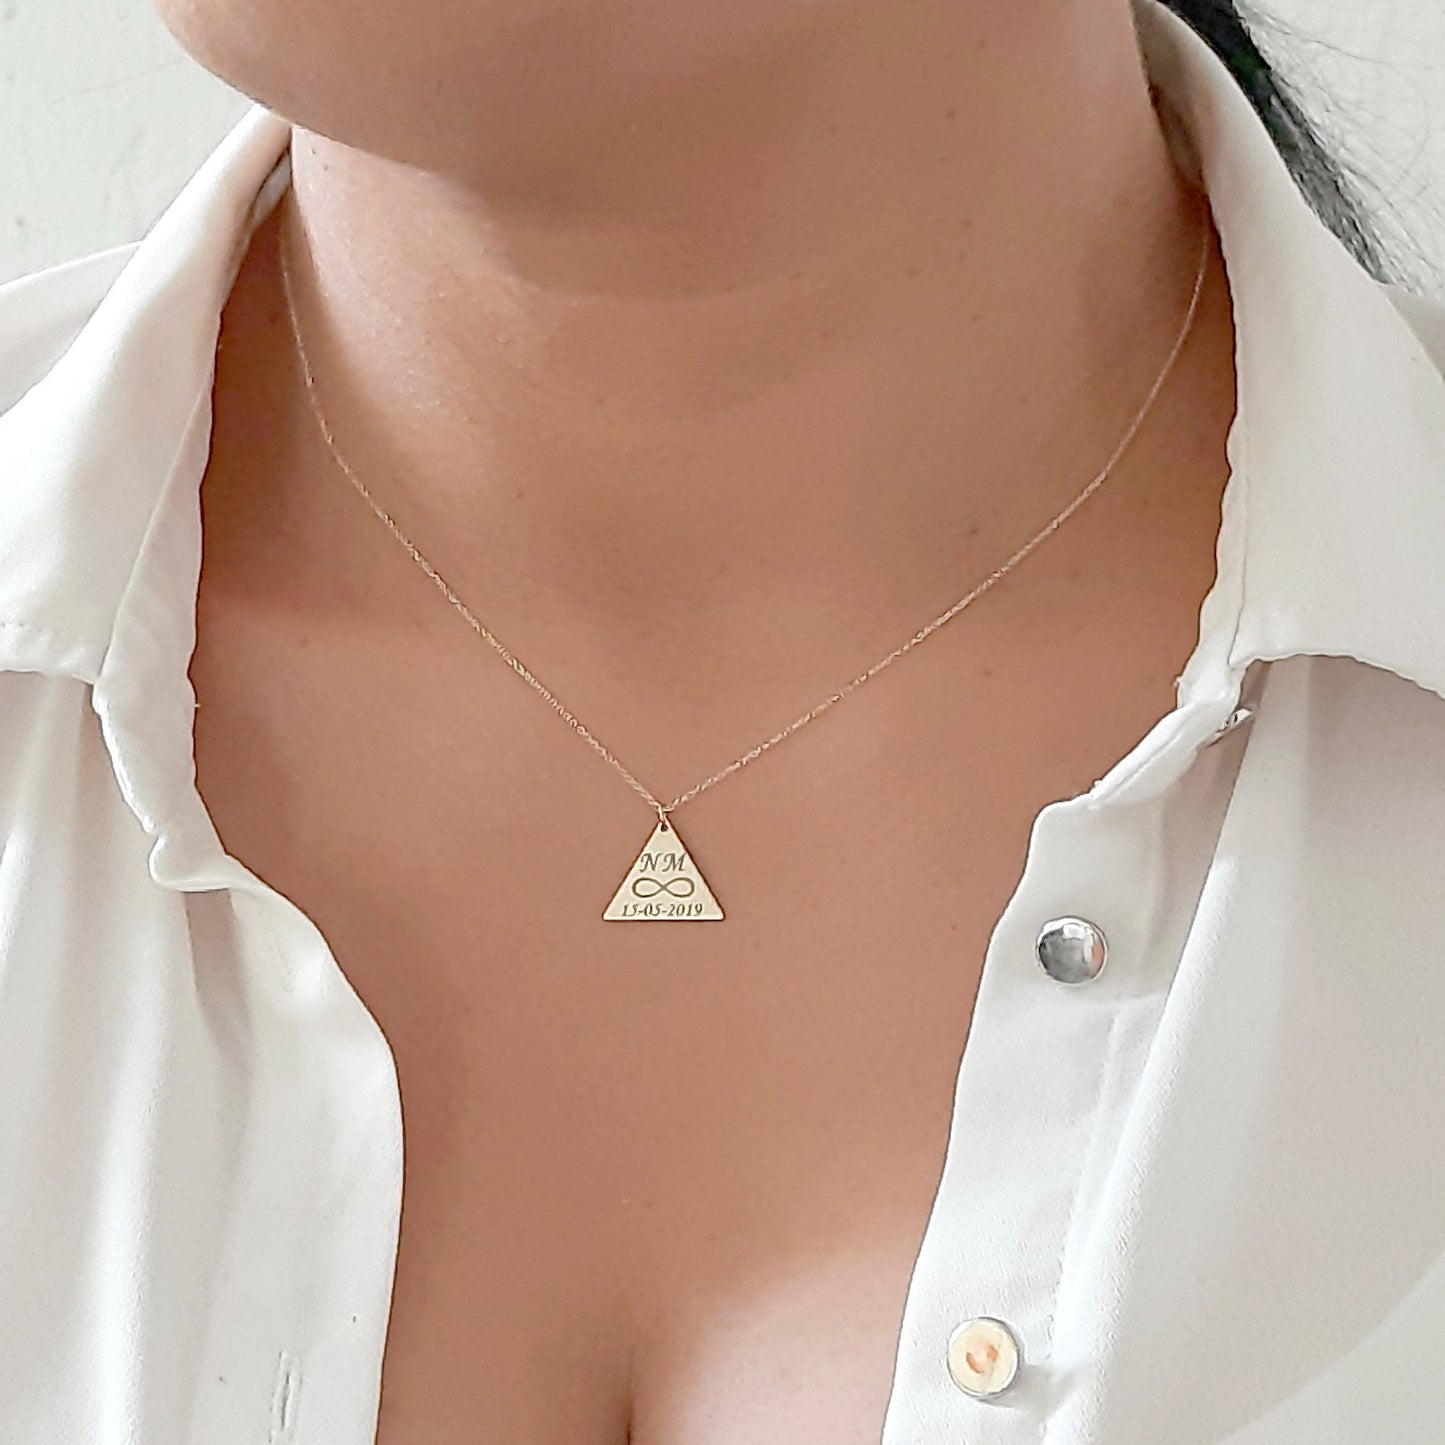 Engraved Triangle Necklace